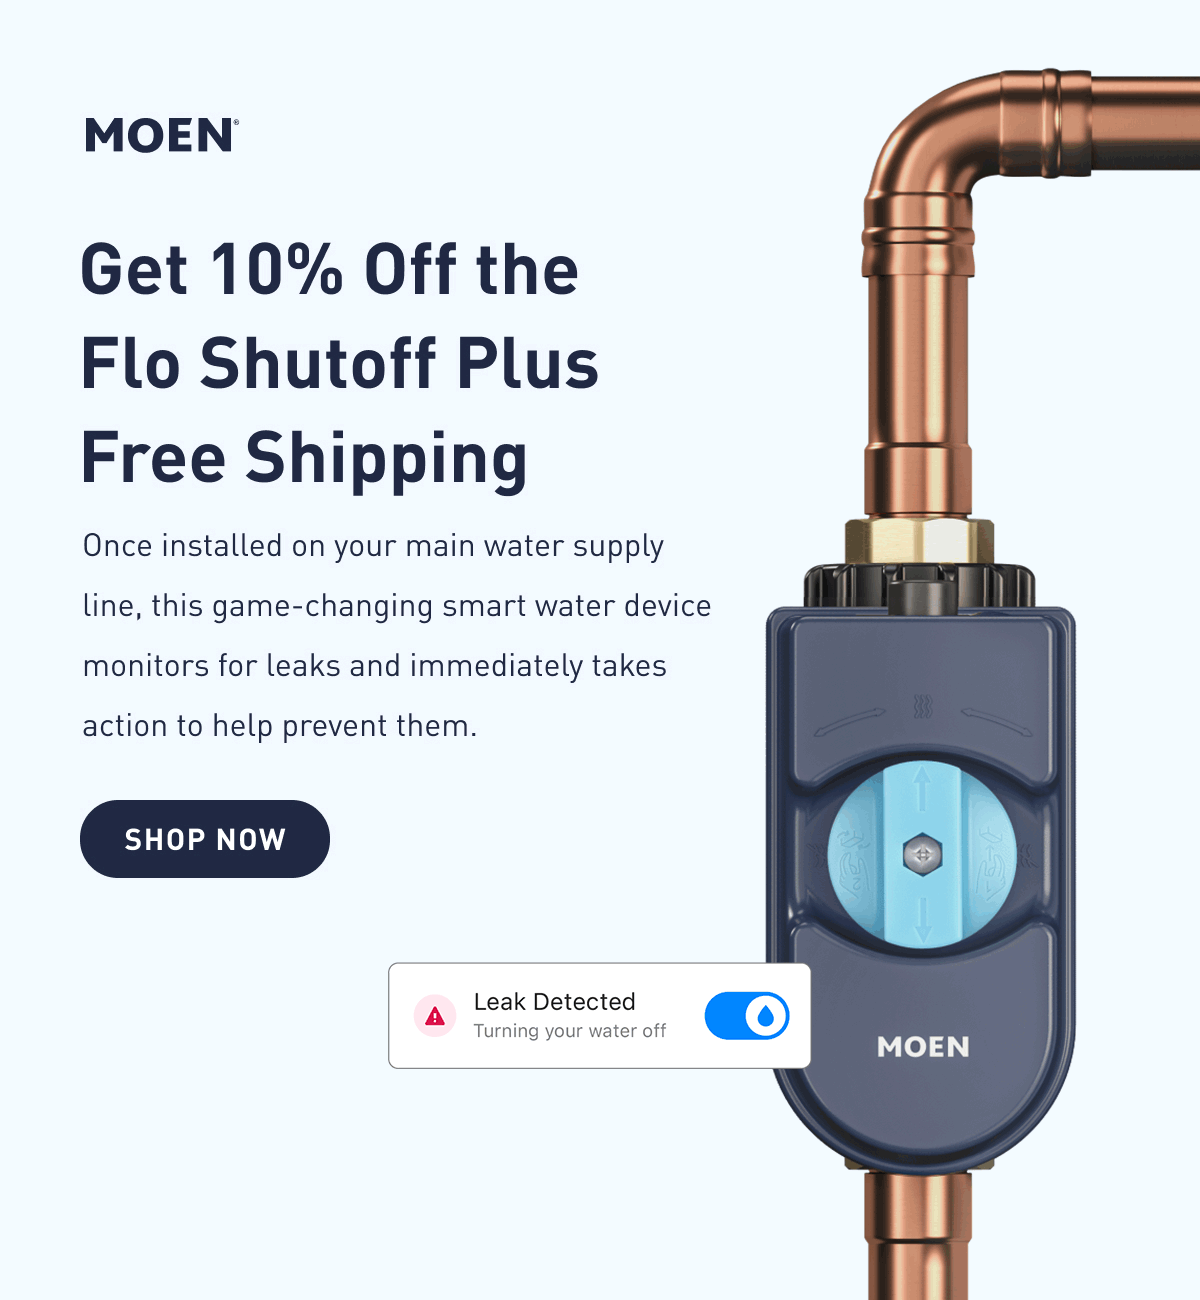 Get 10% Off the Flo Smart Water Monitor and Shutoff | Once installed on your main water supply line, this game-changing smart water device monitors for leaks and immediately takes action to help prevent them. | Shop Now >